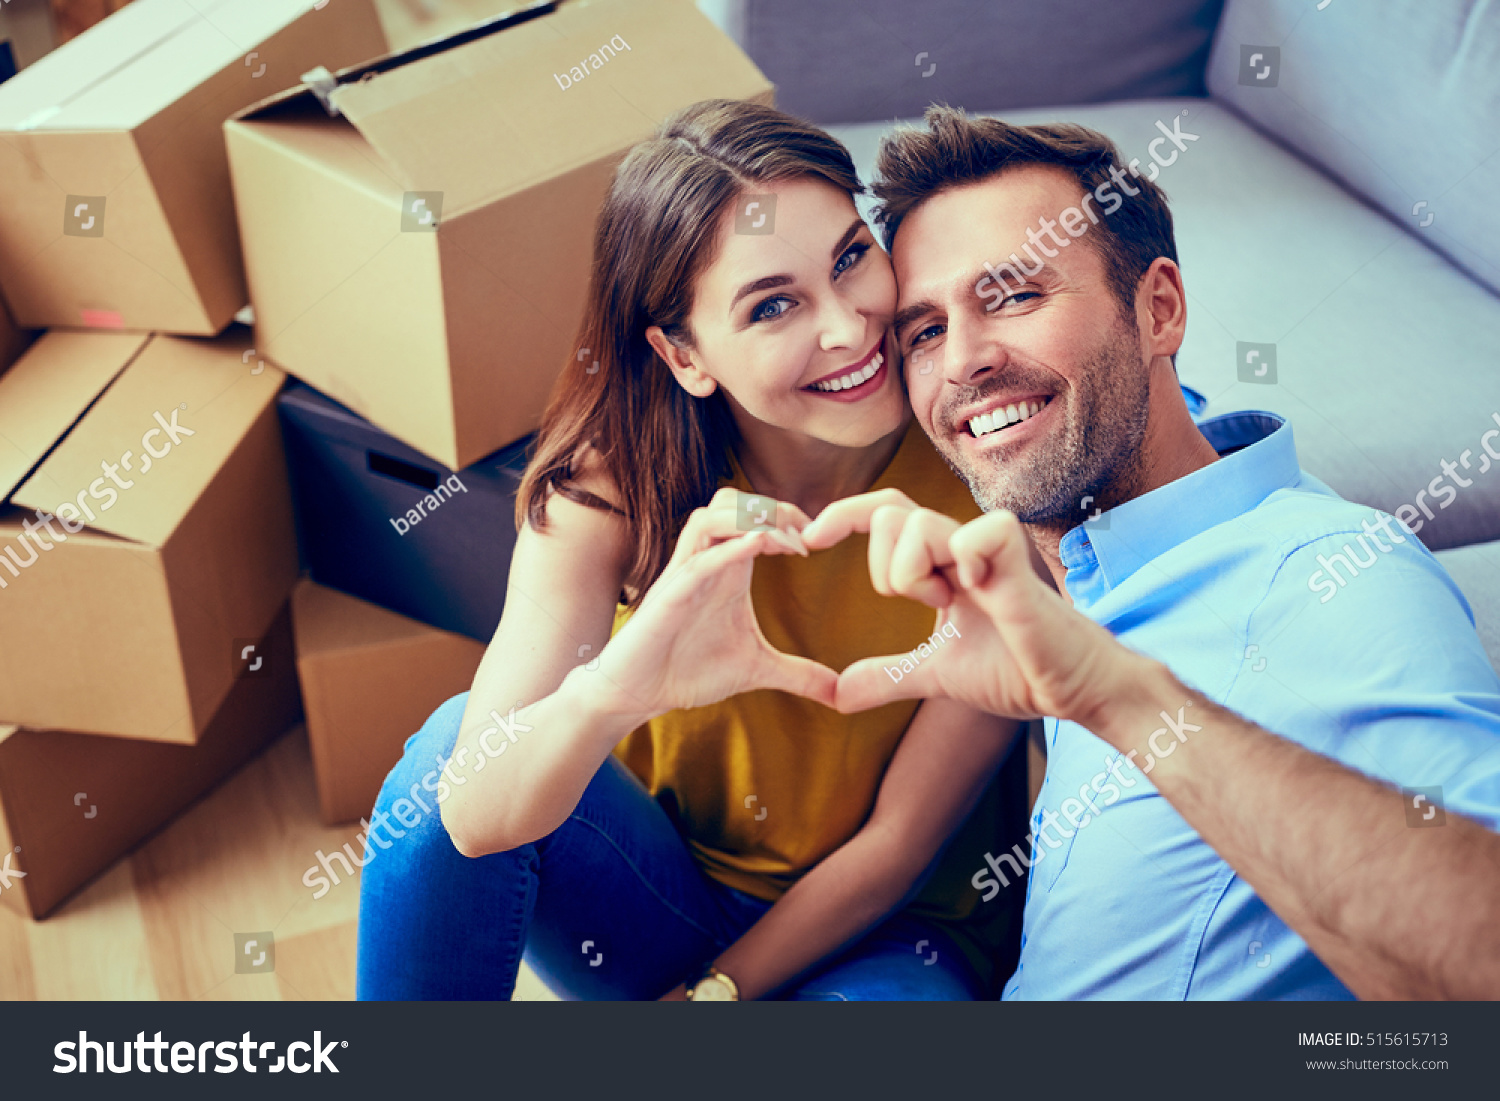 Happy couple during moving house showing heart sign #515615713